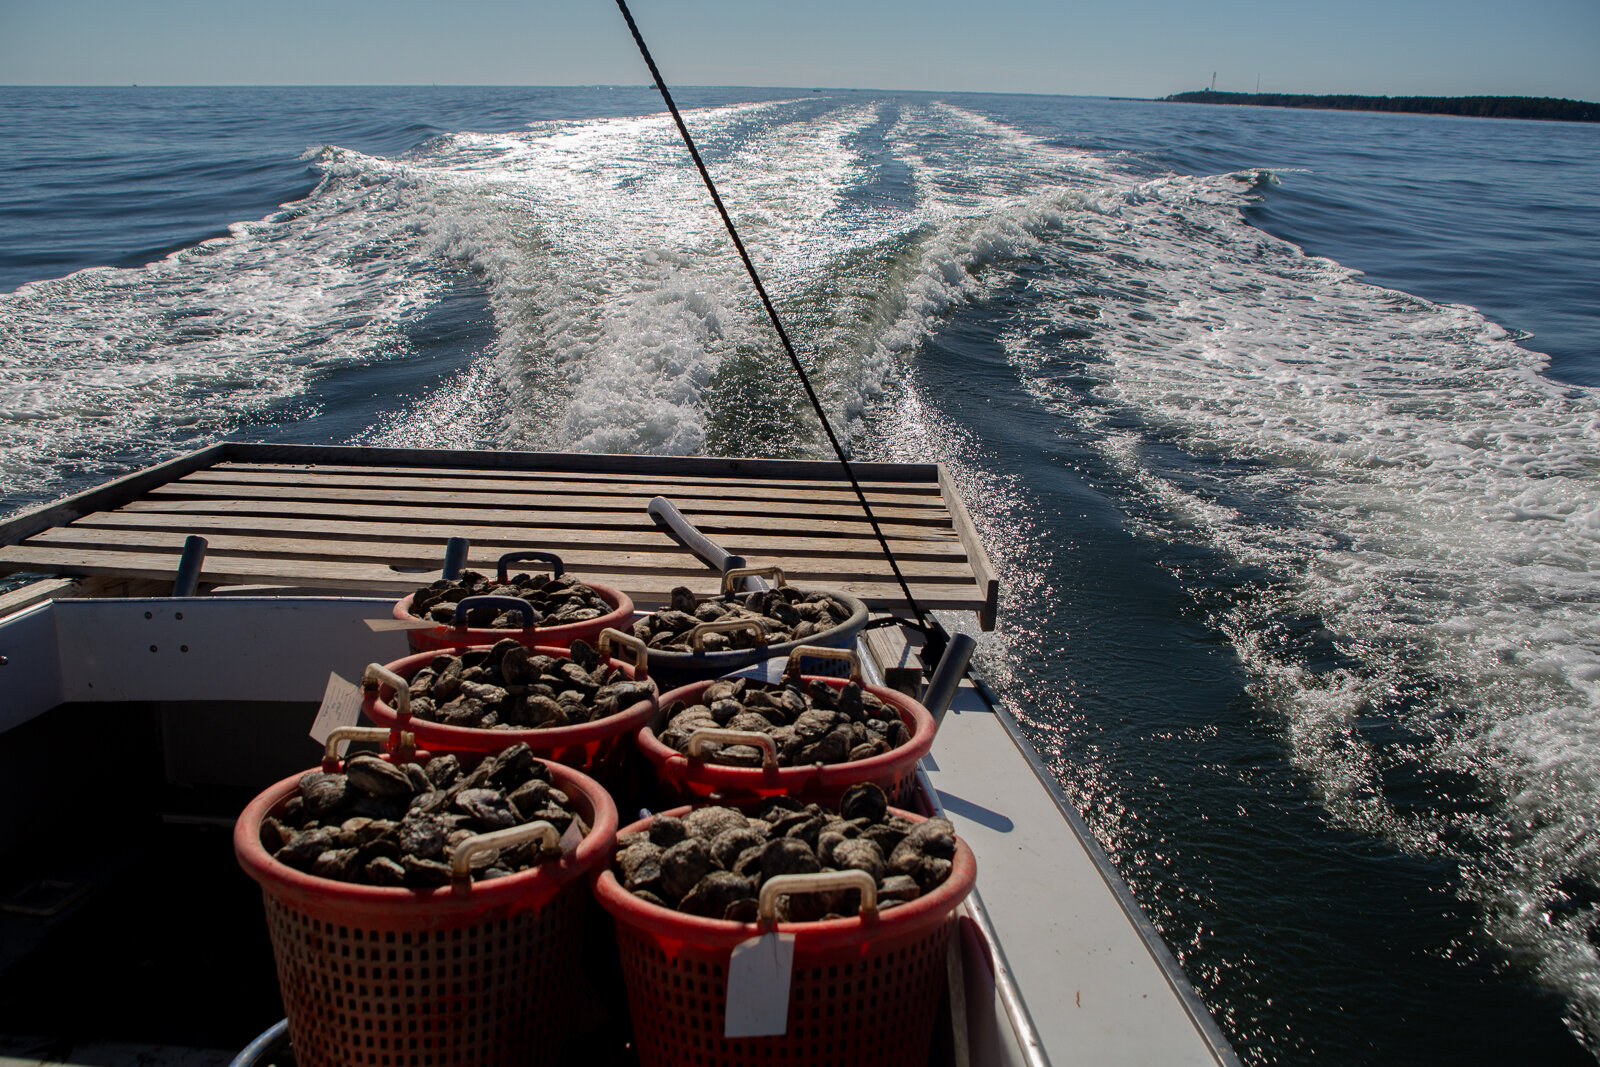  The daily catch of oysters aboard the Snatch Block; Captain Dale "Simon" Dean of Patuxent River Seafood's boat as the vessel heads back to shore, Wednesday, Nov. 7, 2018 in Solomon Island, MD. As a part of the Dock to Dish nonprofit program, this lo